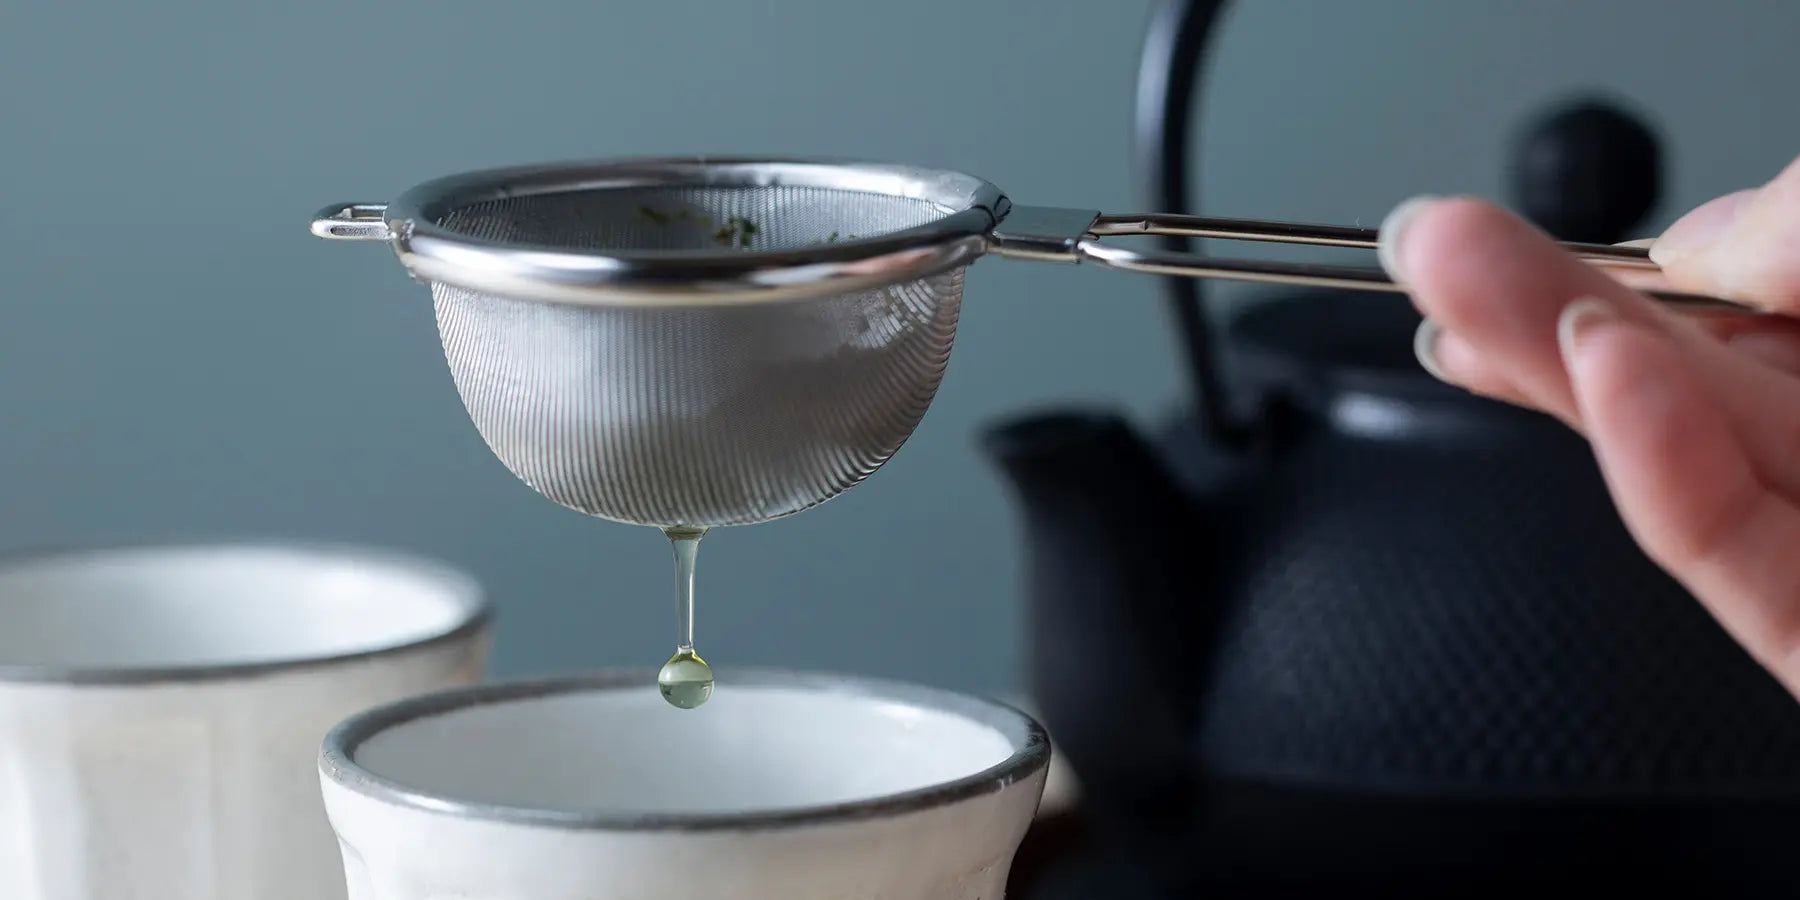 Discover our great selection of Tea Strainers at Globalkitchen Japan.